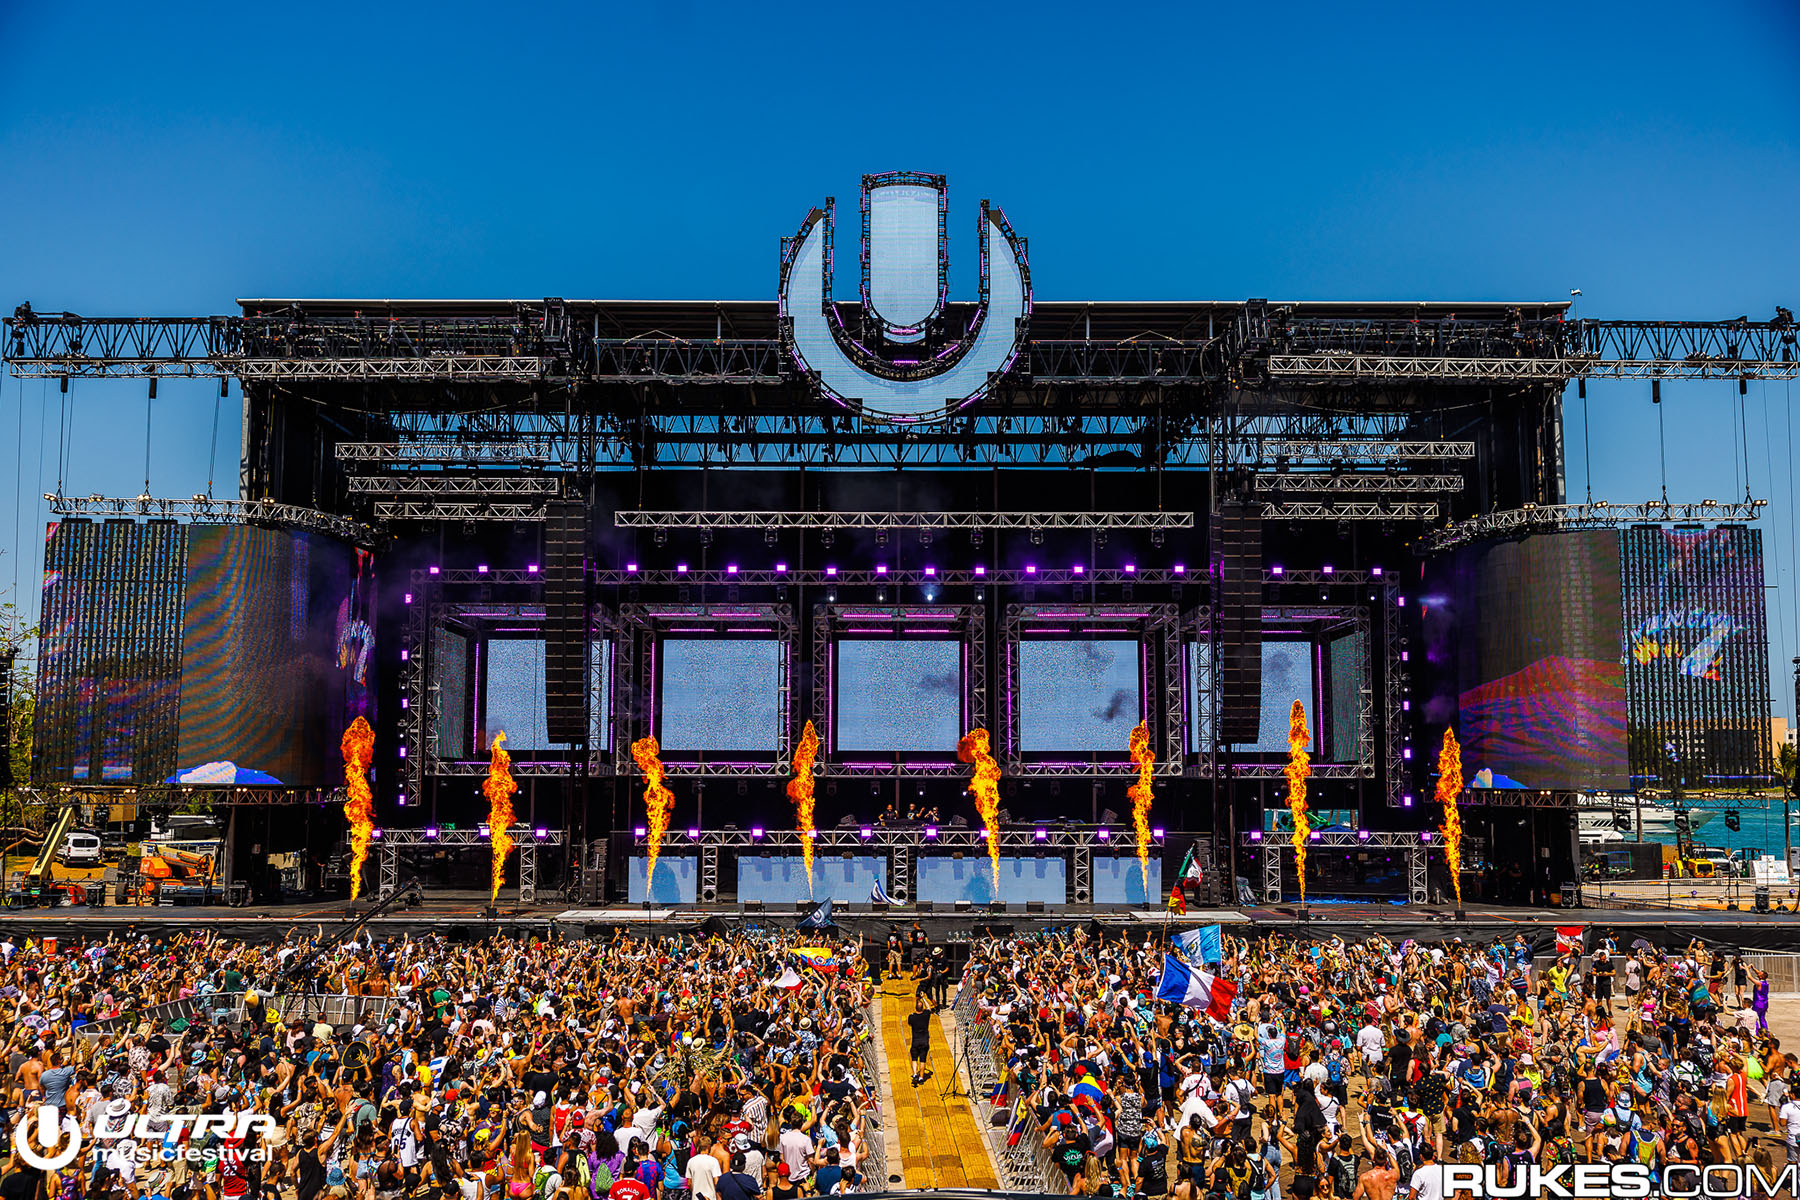 L-Acoustics K1 Takes the Main Stage at Miami’s Ultra Music Festival featured image